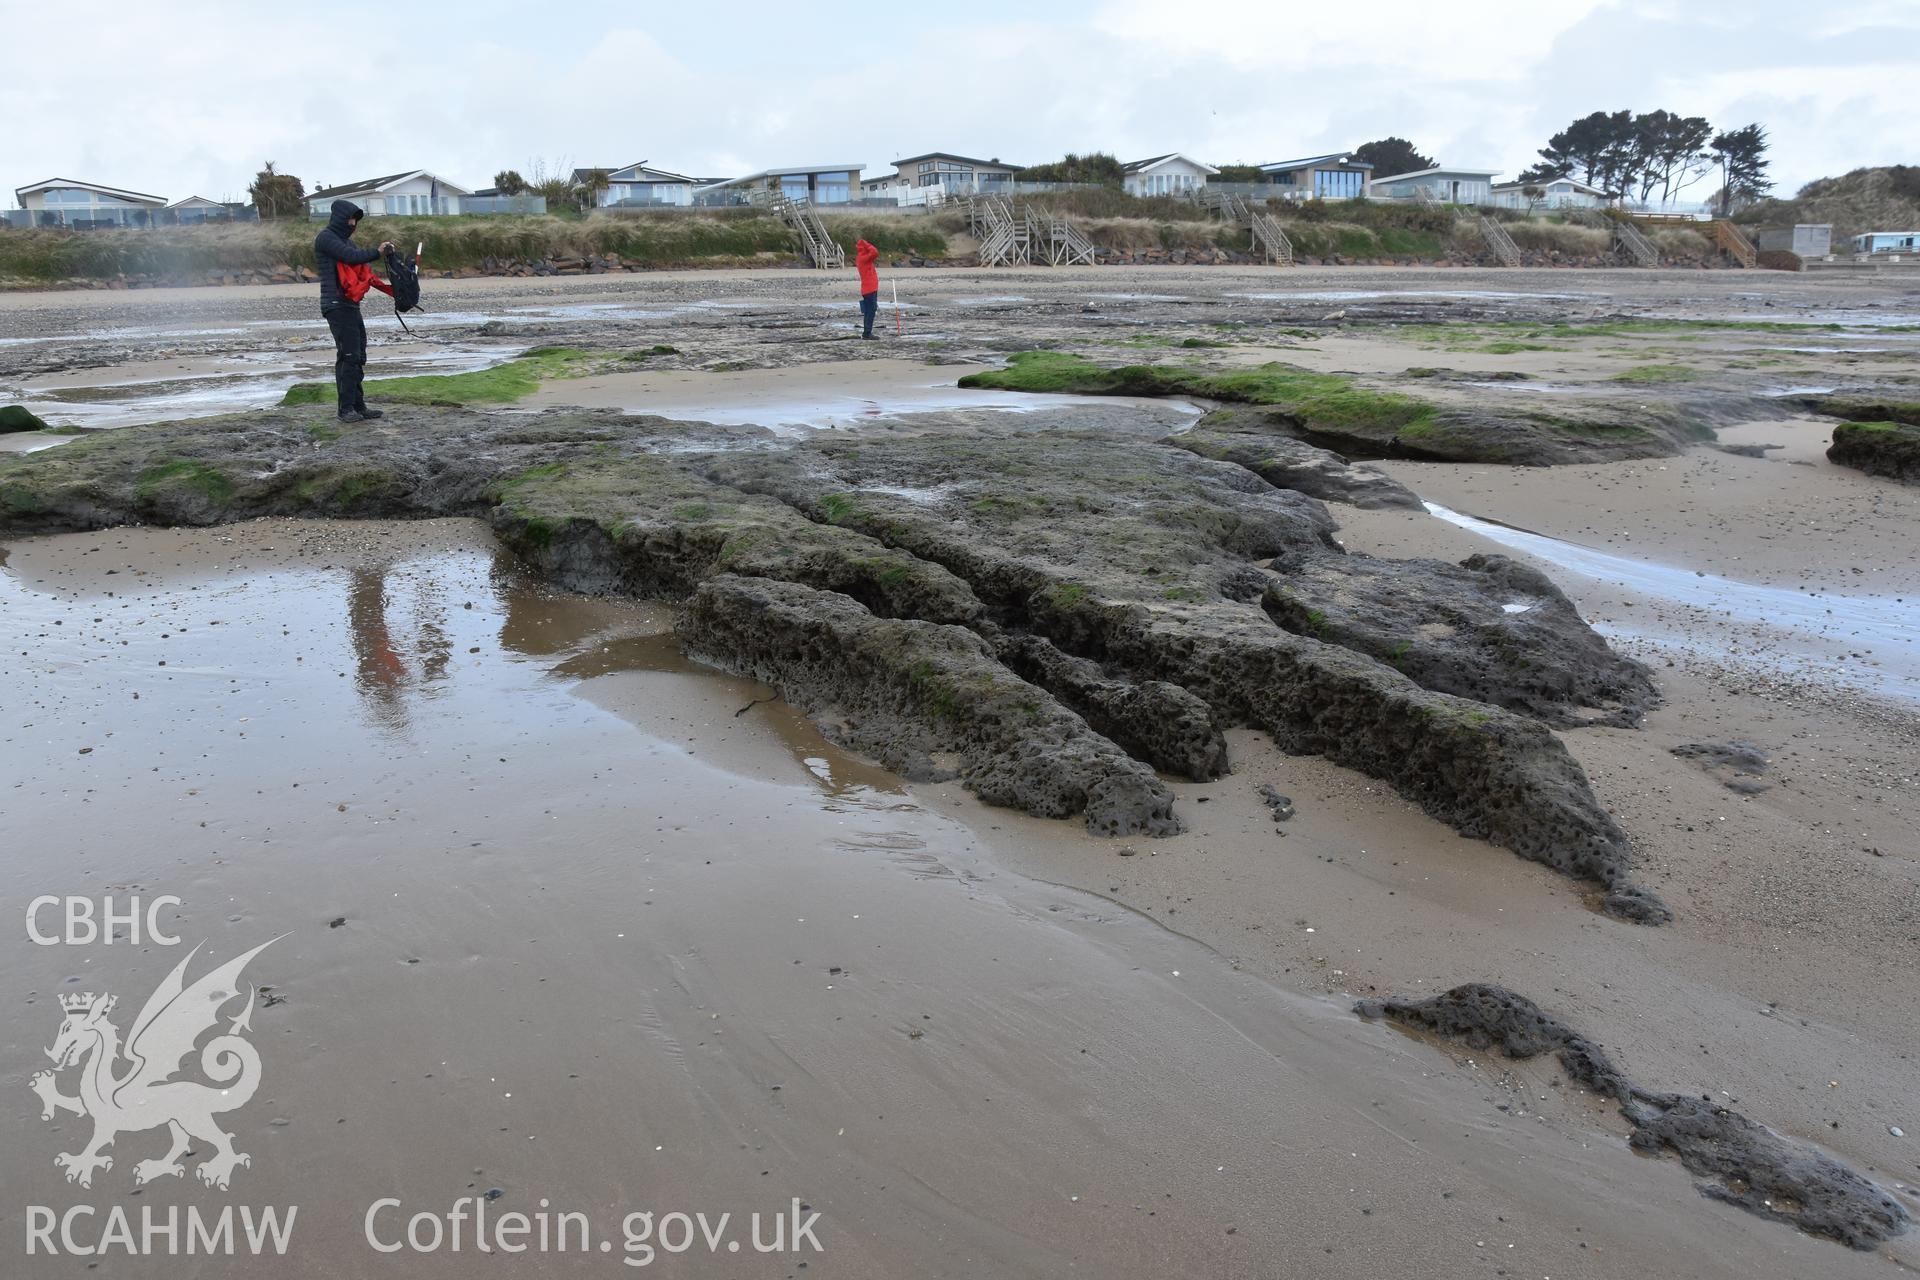 General view of peat exposures on The Warren beach, Abersoch, April 2018, including prehistoric animal footprints and later peat cuttings.Recorded with GNSS and photogrammetry for the CHERISH Project. ? Crown: CHERISH PROJECT 2018. Produced with EU funds through the Ireland Wales Co-operation Programme 2014-2020. All material made freely available through the Open Government Licence.